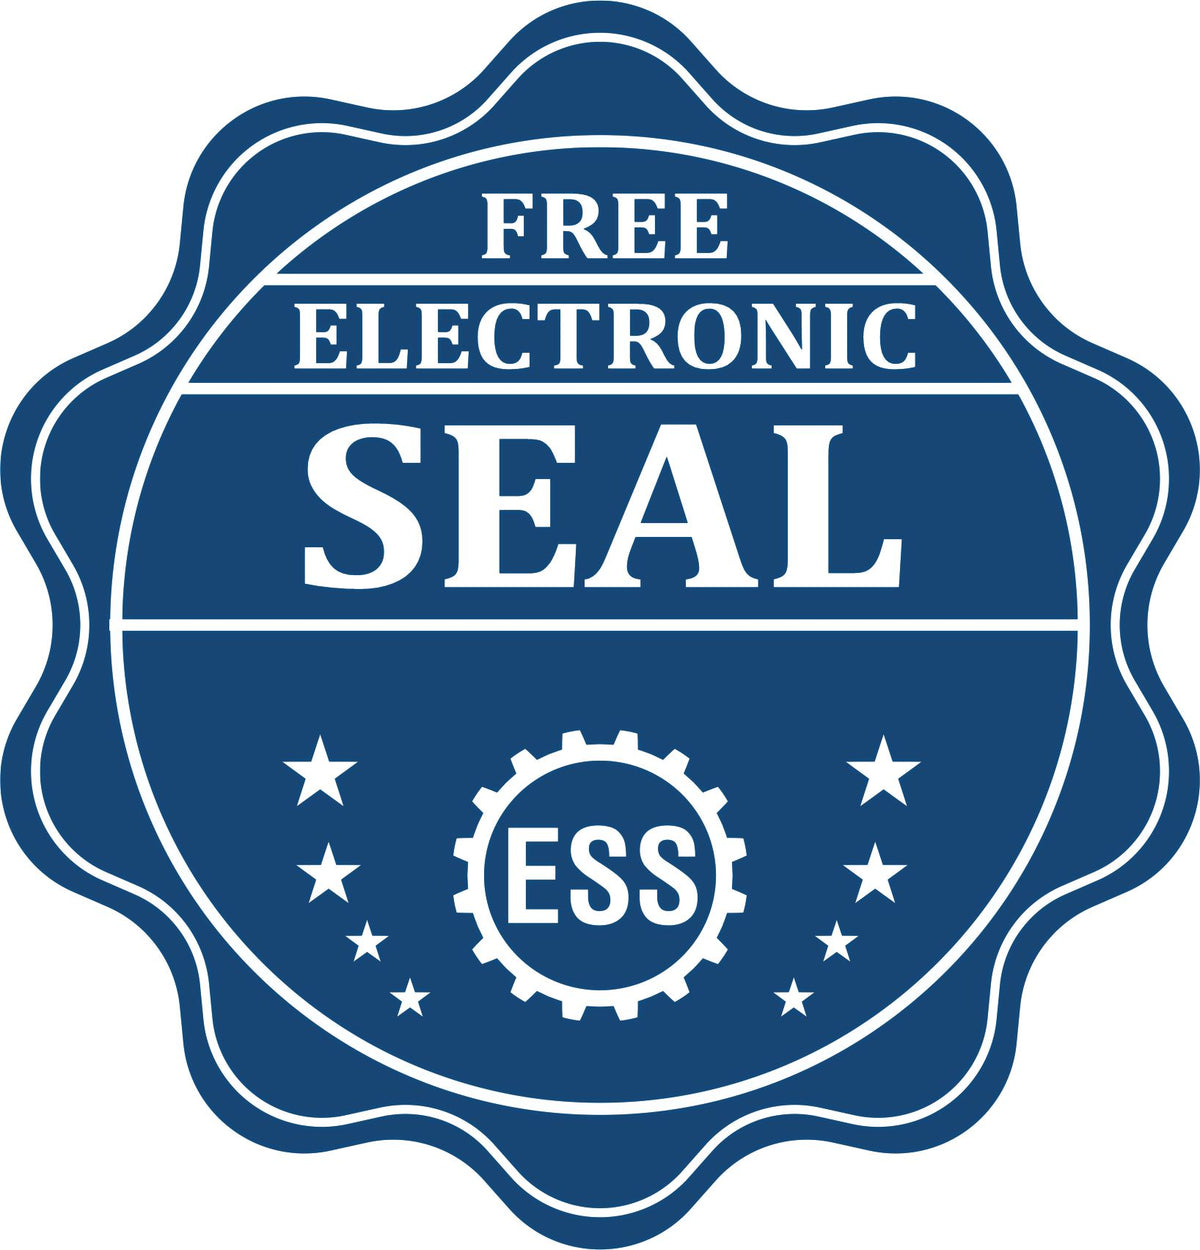 A badge showing a free electronic seal for the Hybrid Kansas Land Surveyor Seal with stars and the ESS gear on the emblem.